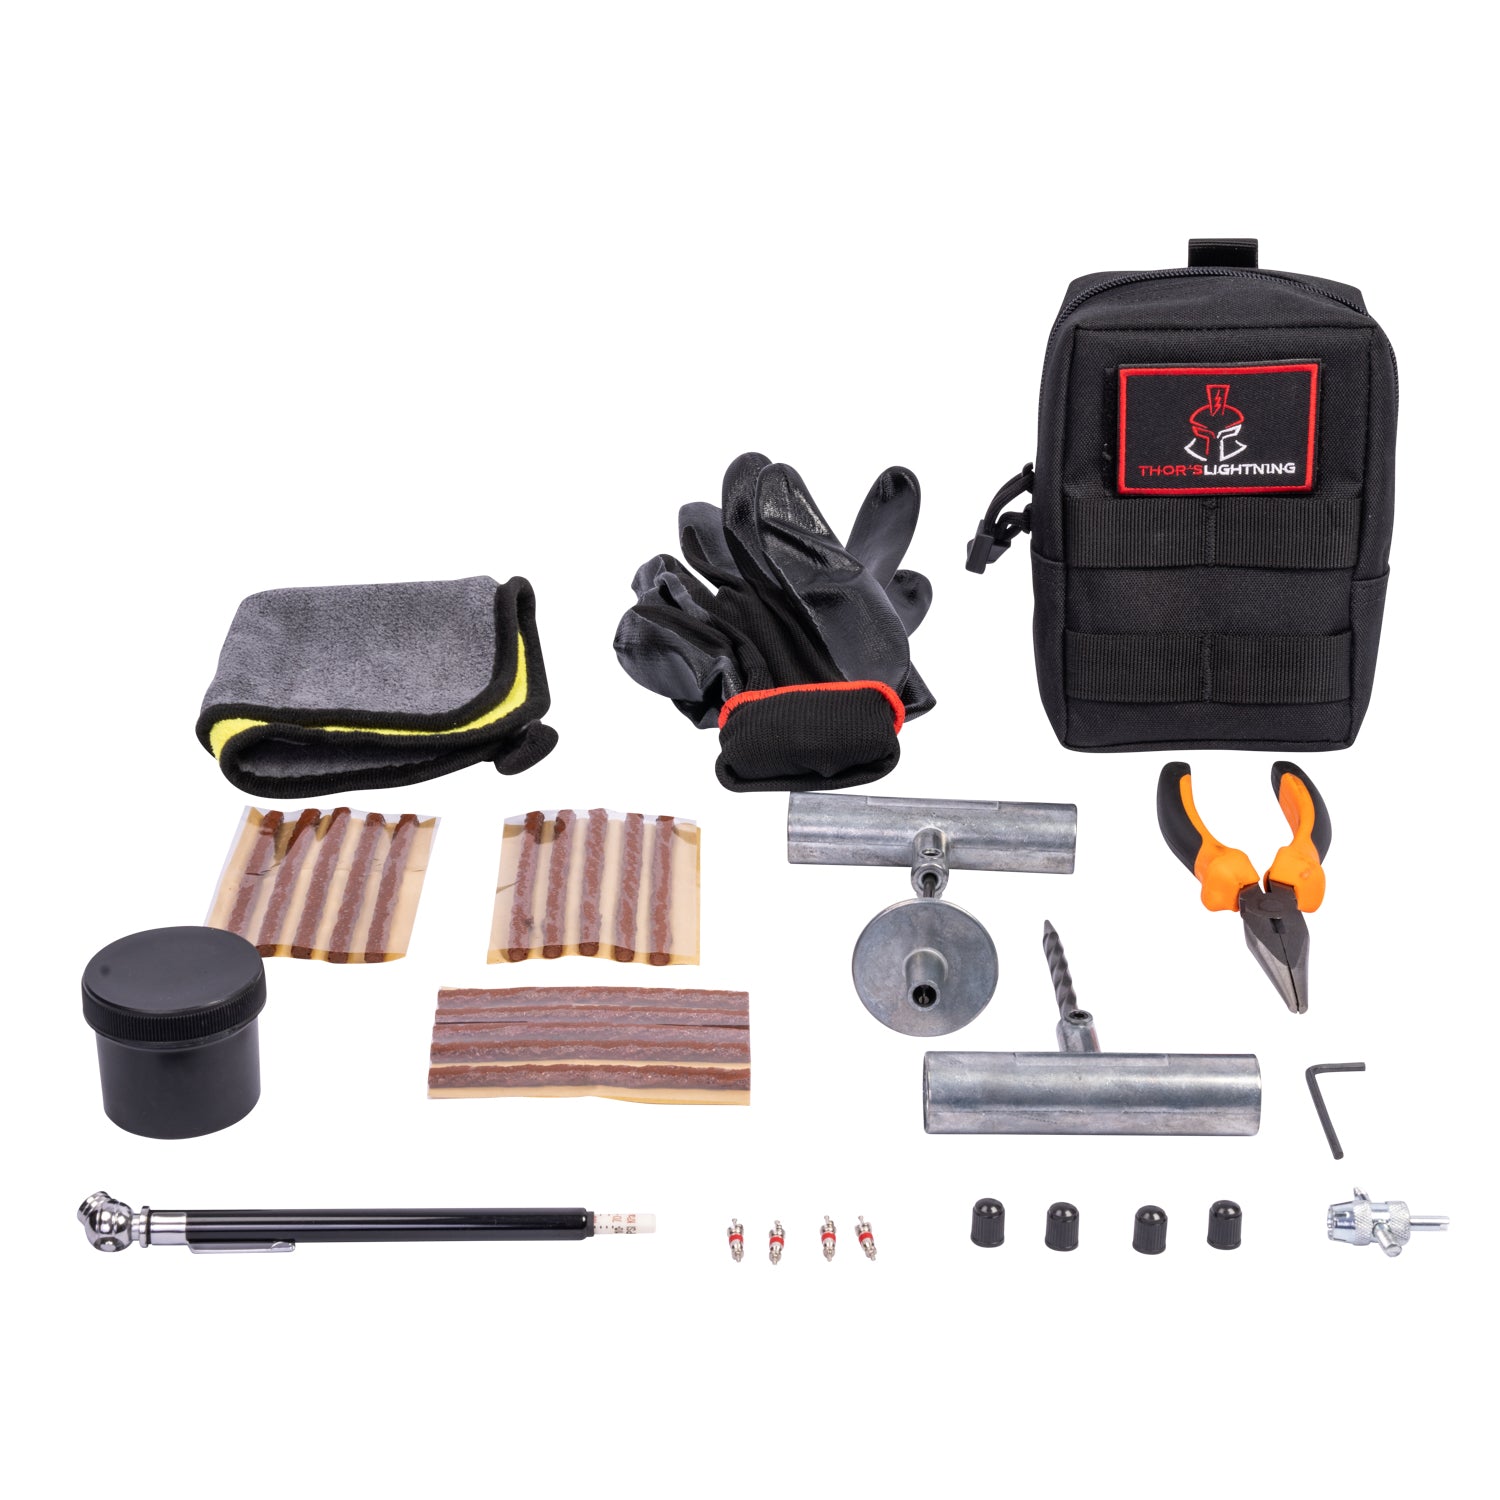 Thor's Lightning Adventure Gear Compact Portable Heavy Duty Tire Repair kit with Molle Storage Bag